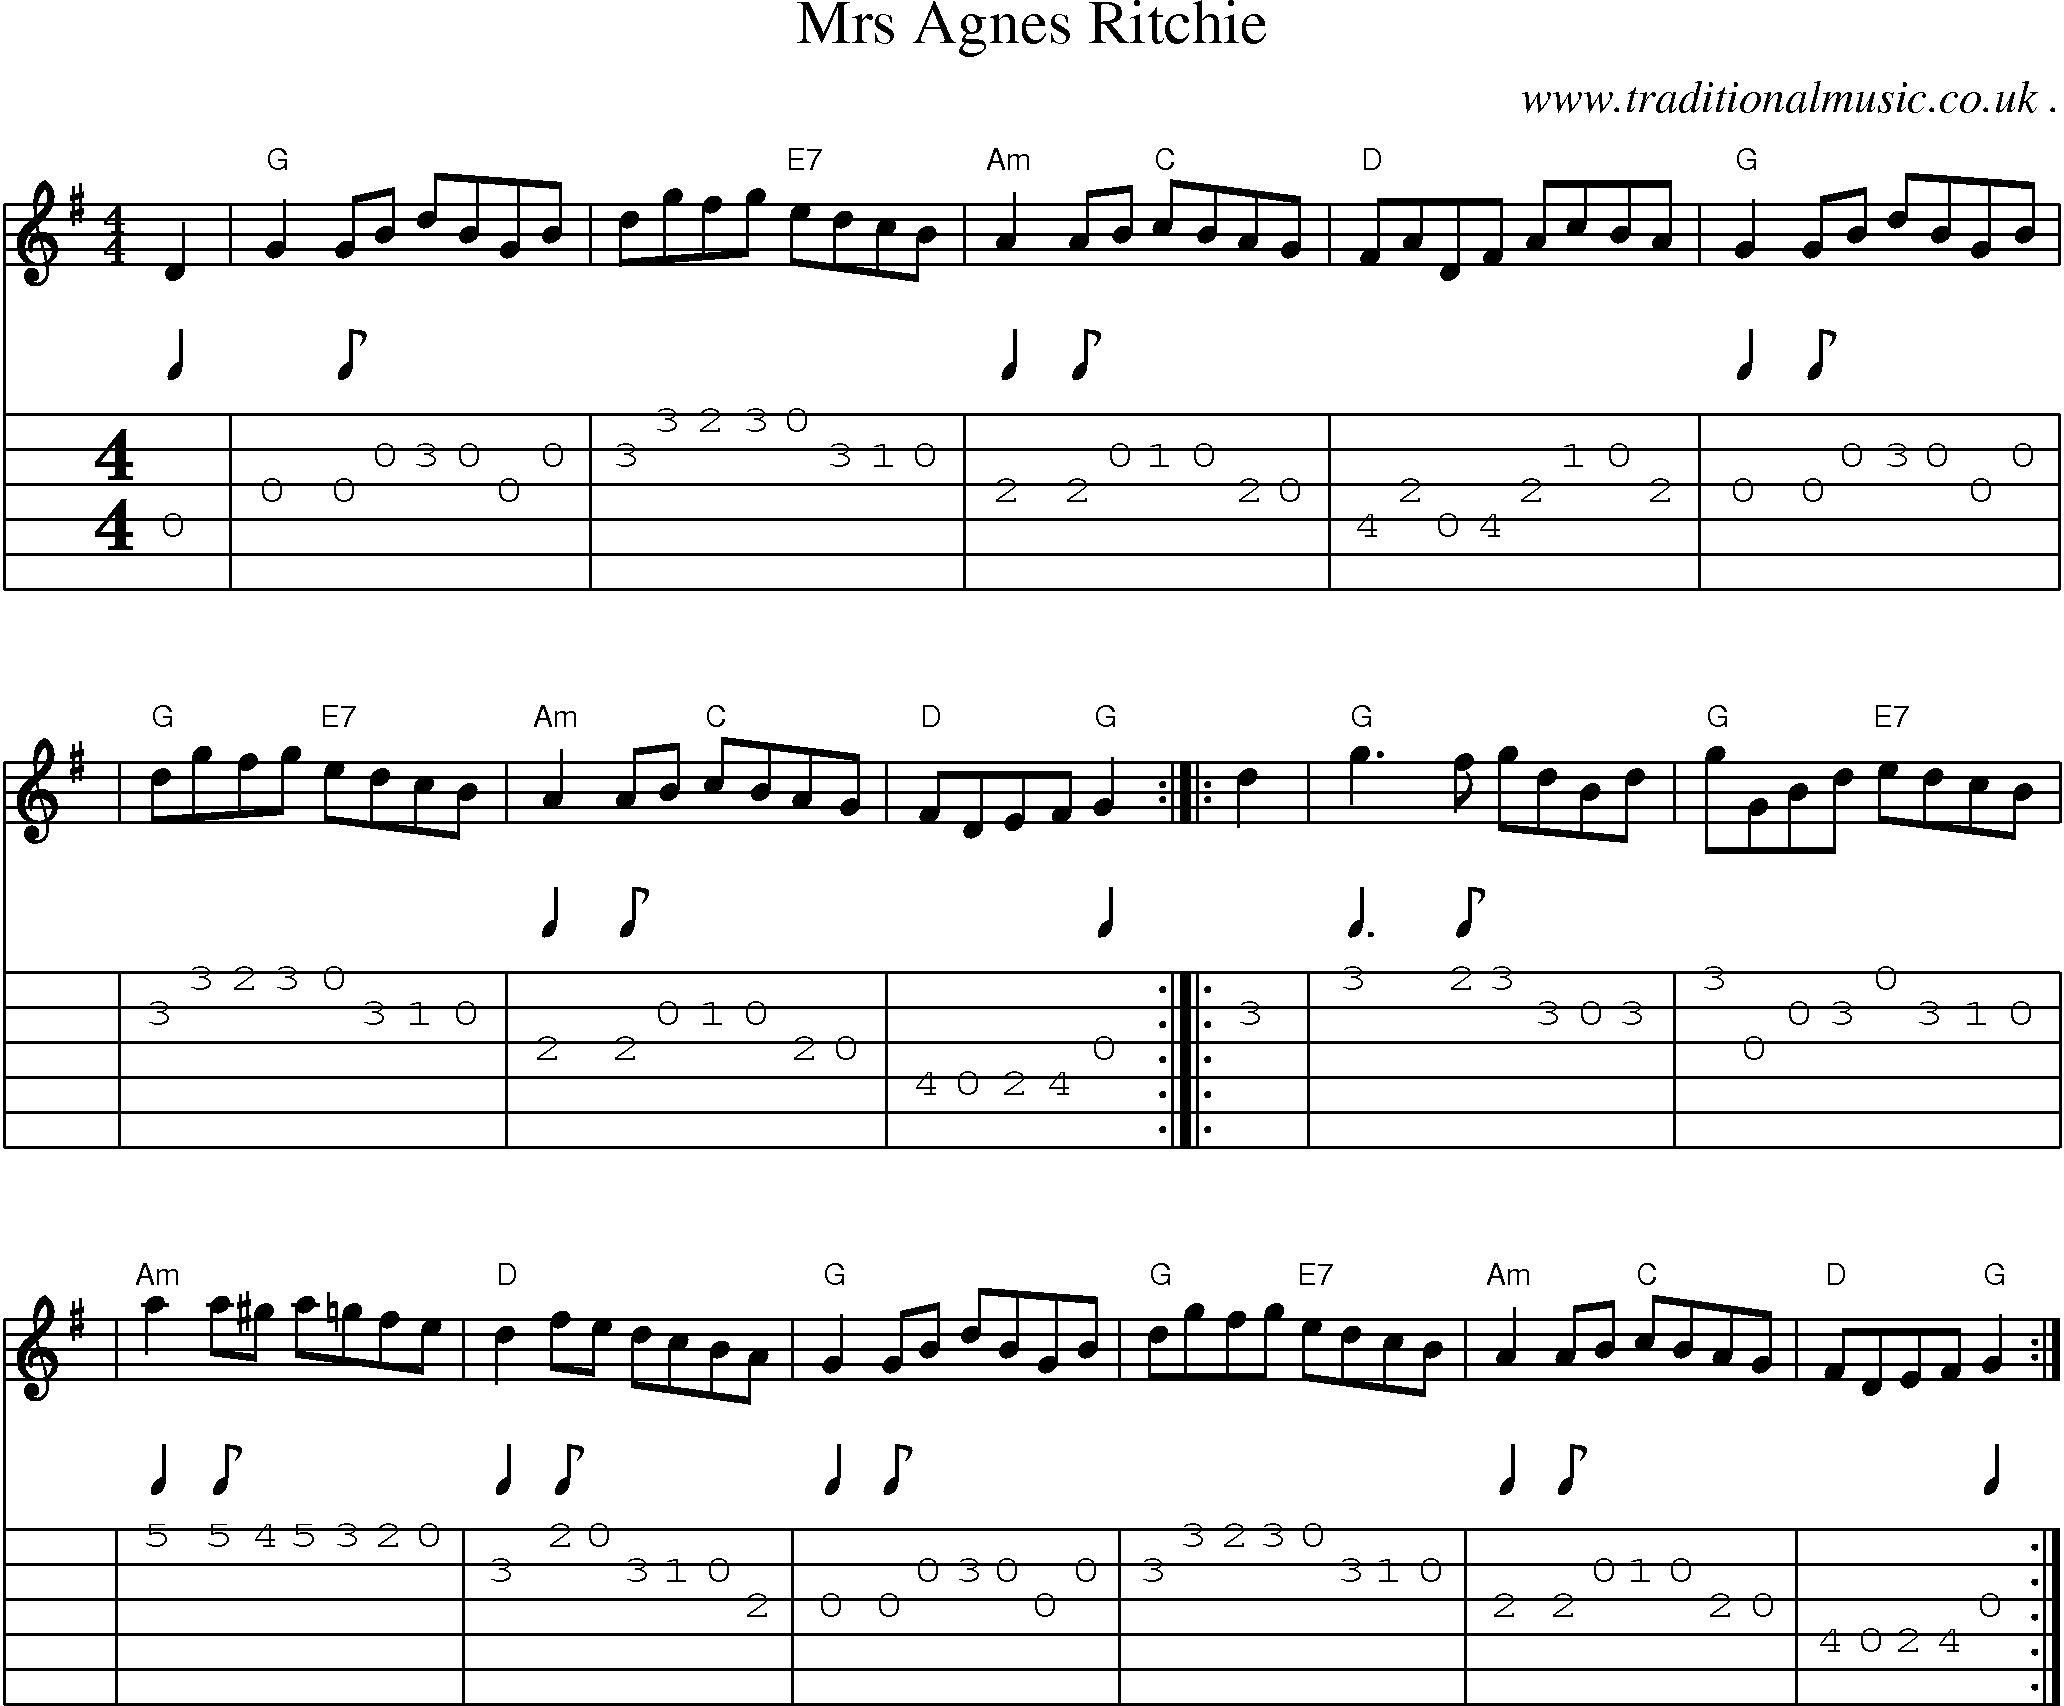 Sheet-music  score, Chords and Guitar Tabs for Mrs Agnes Ritchie